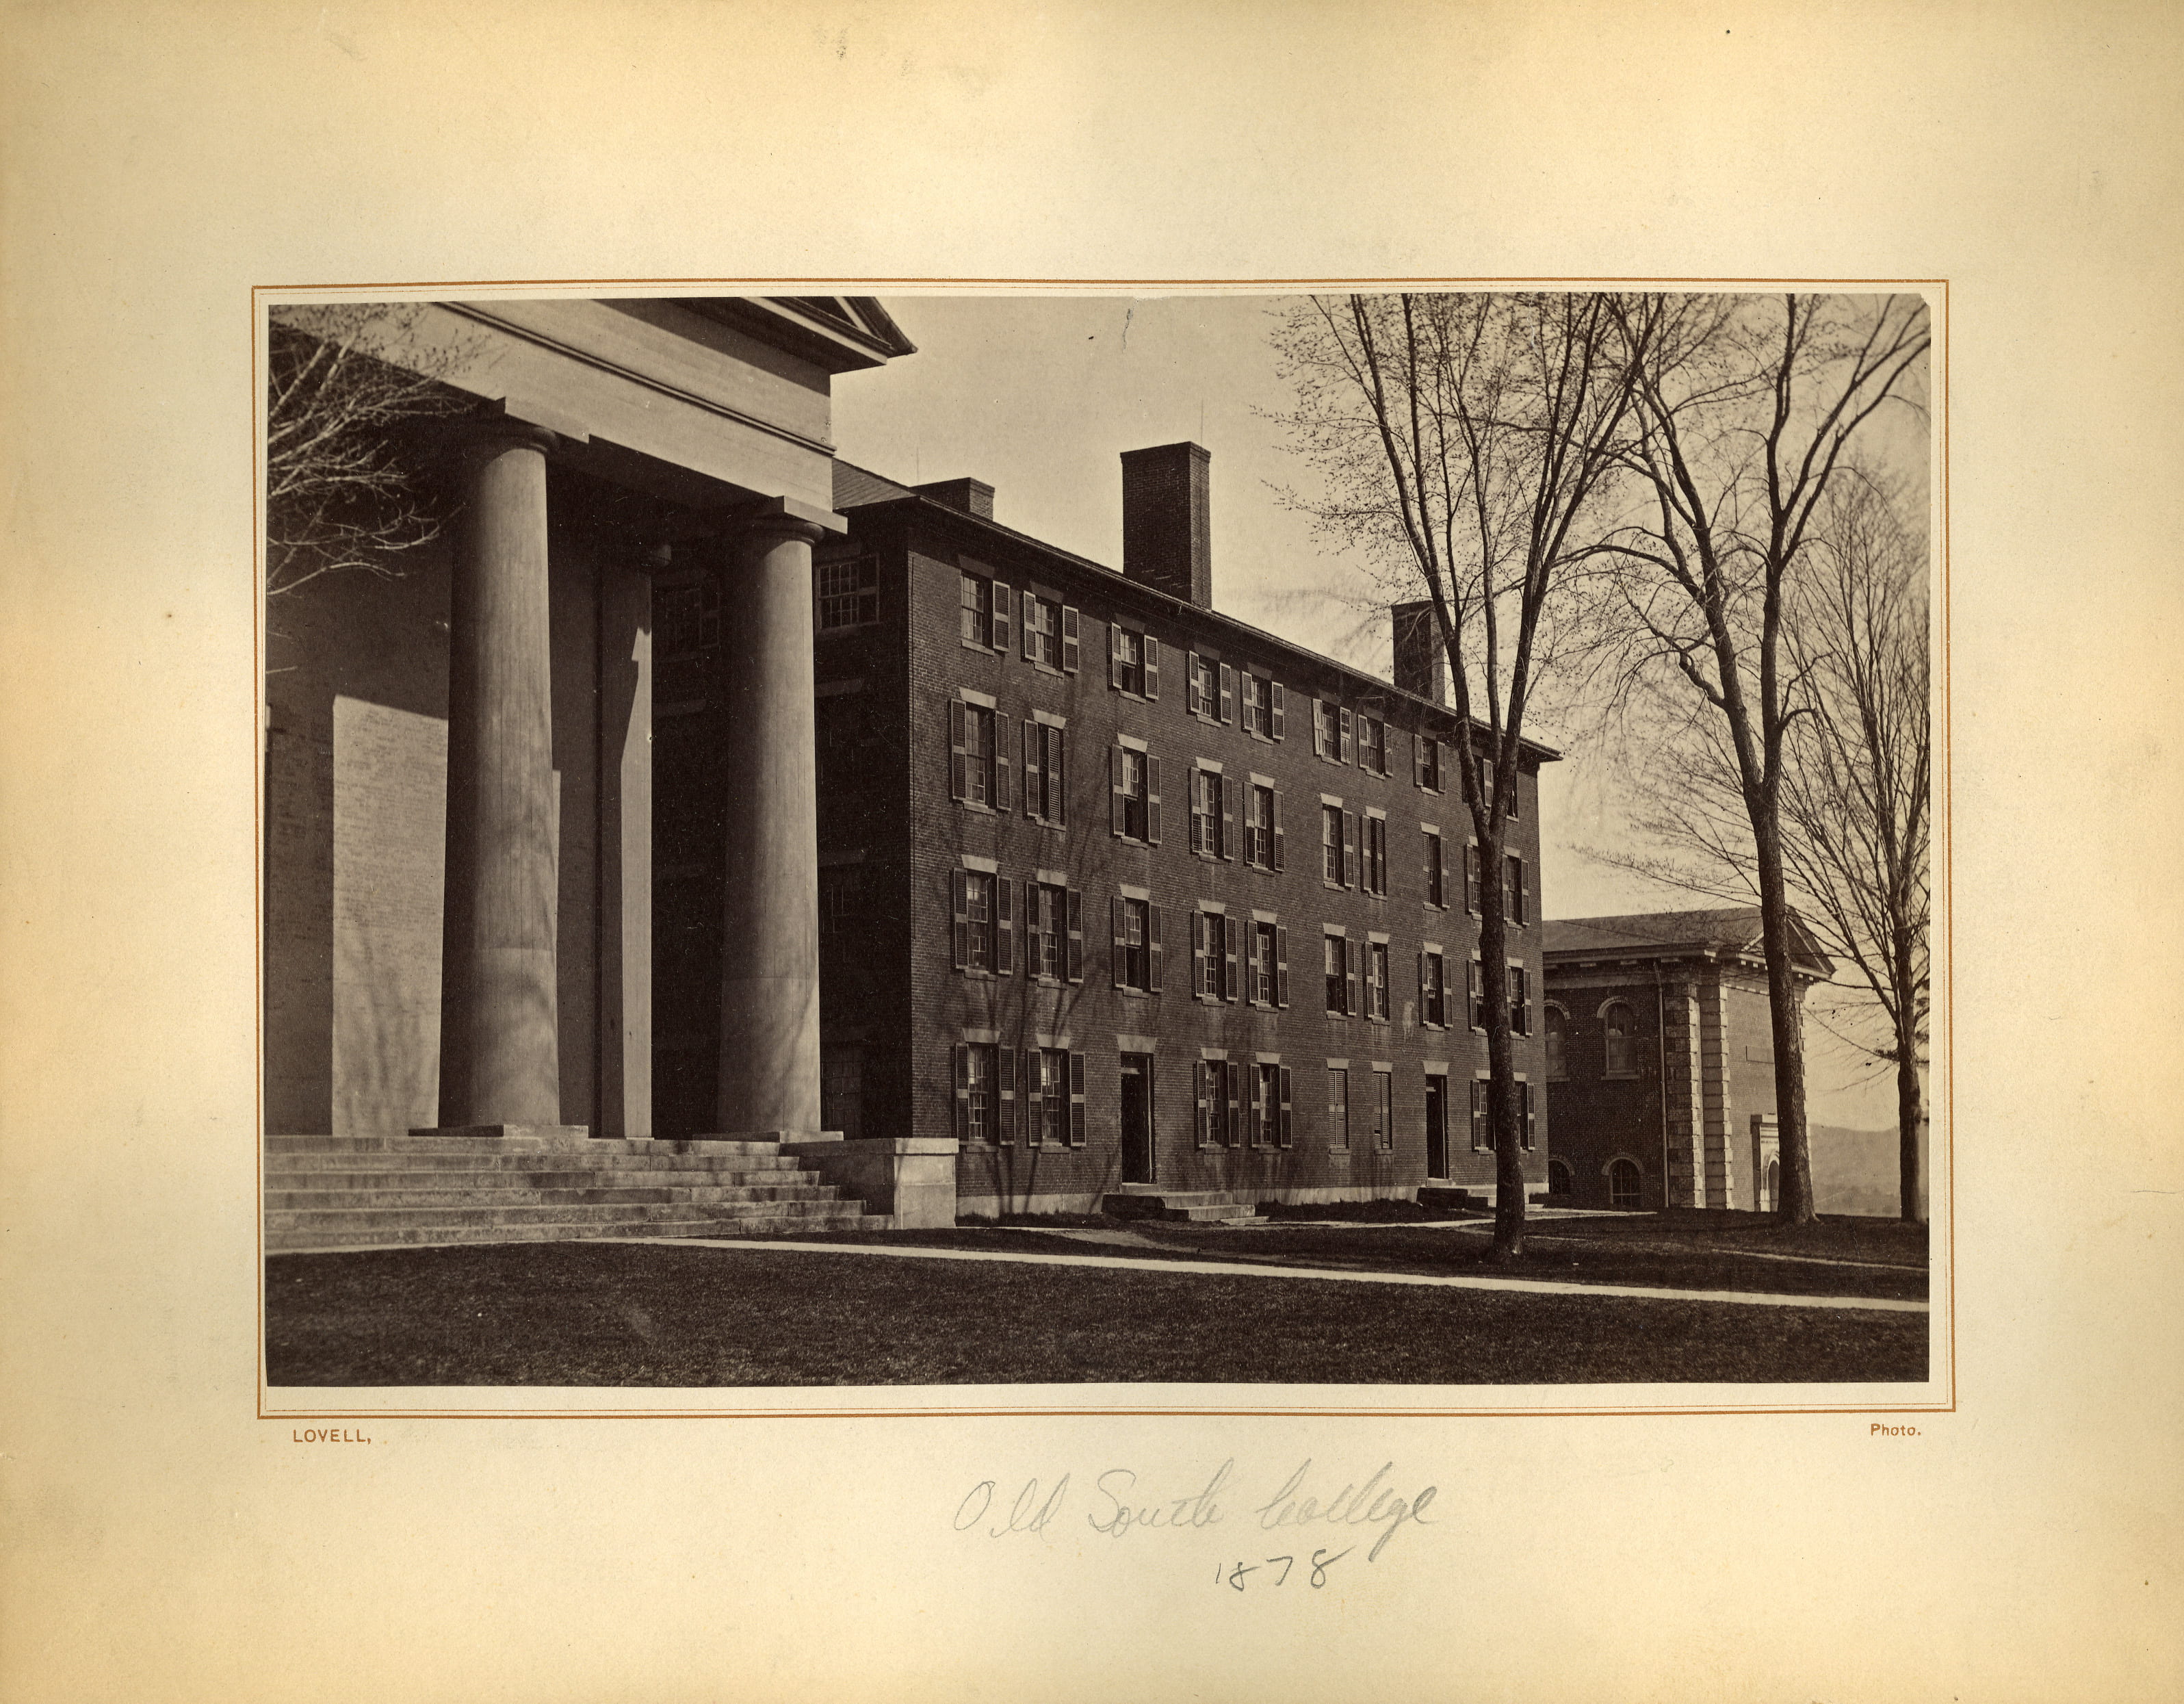 South College in 1878